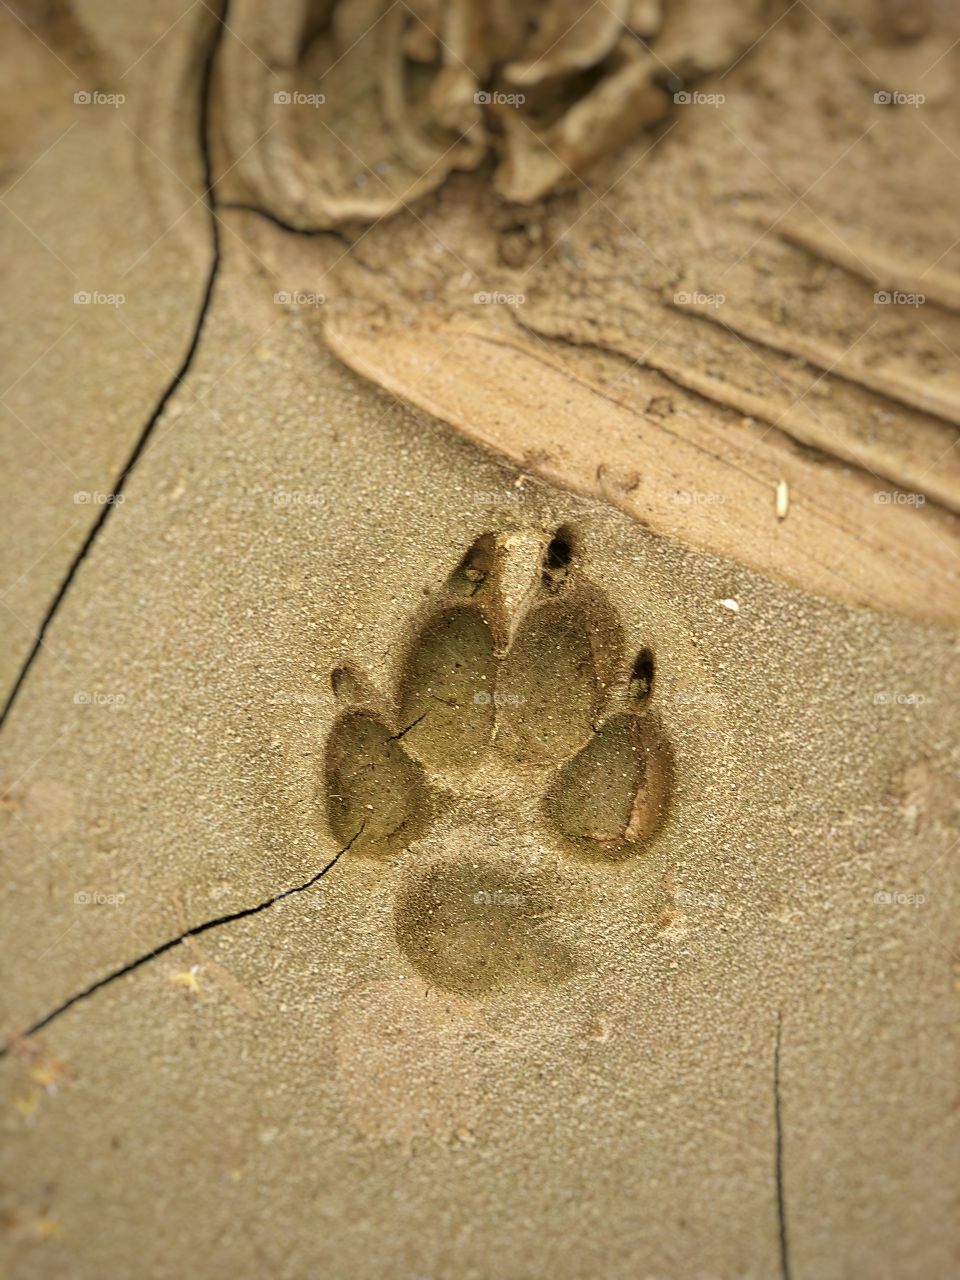 Perfect Paw Print in The Sand 